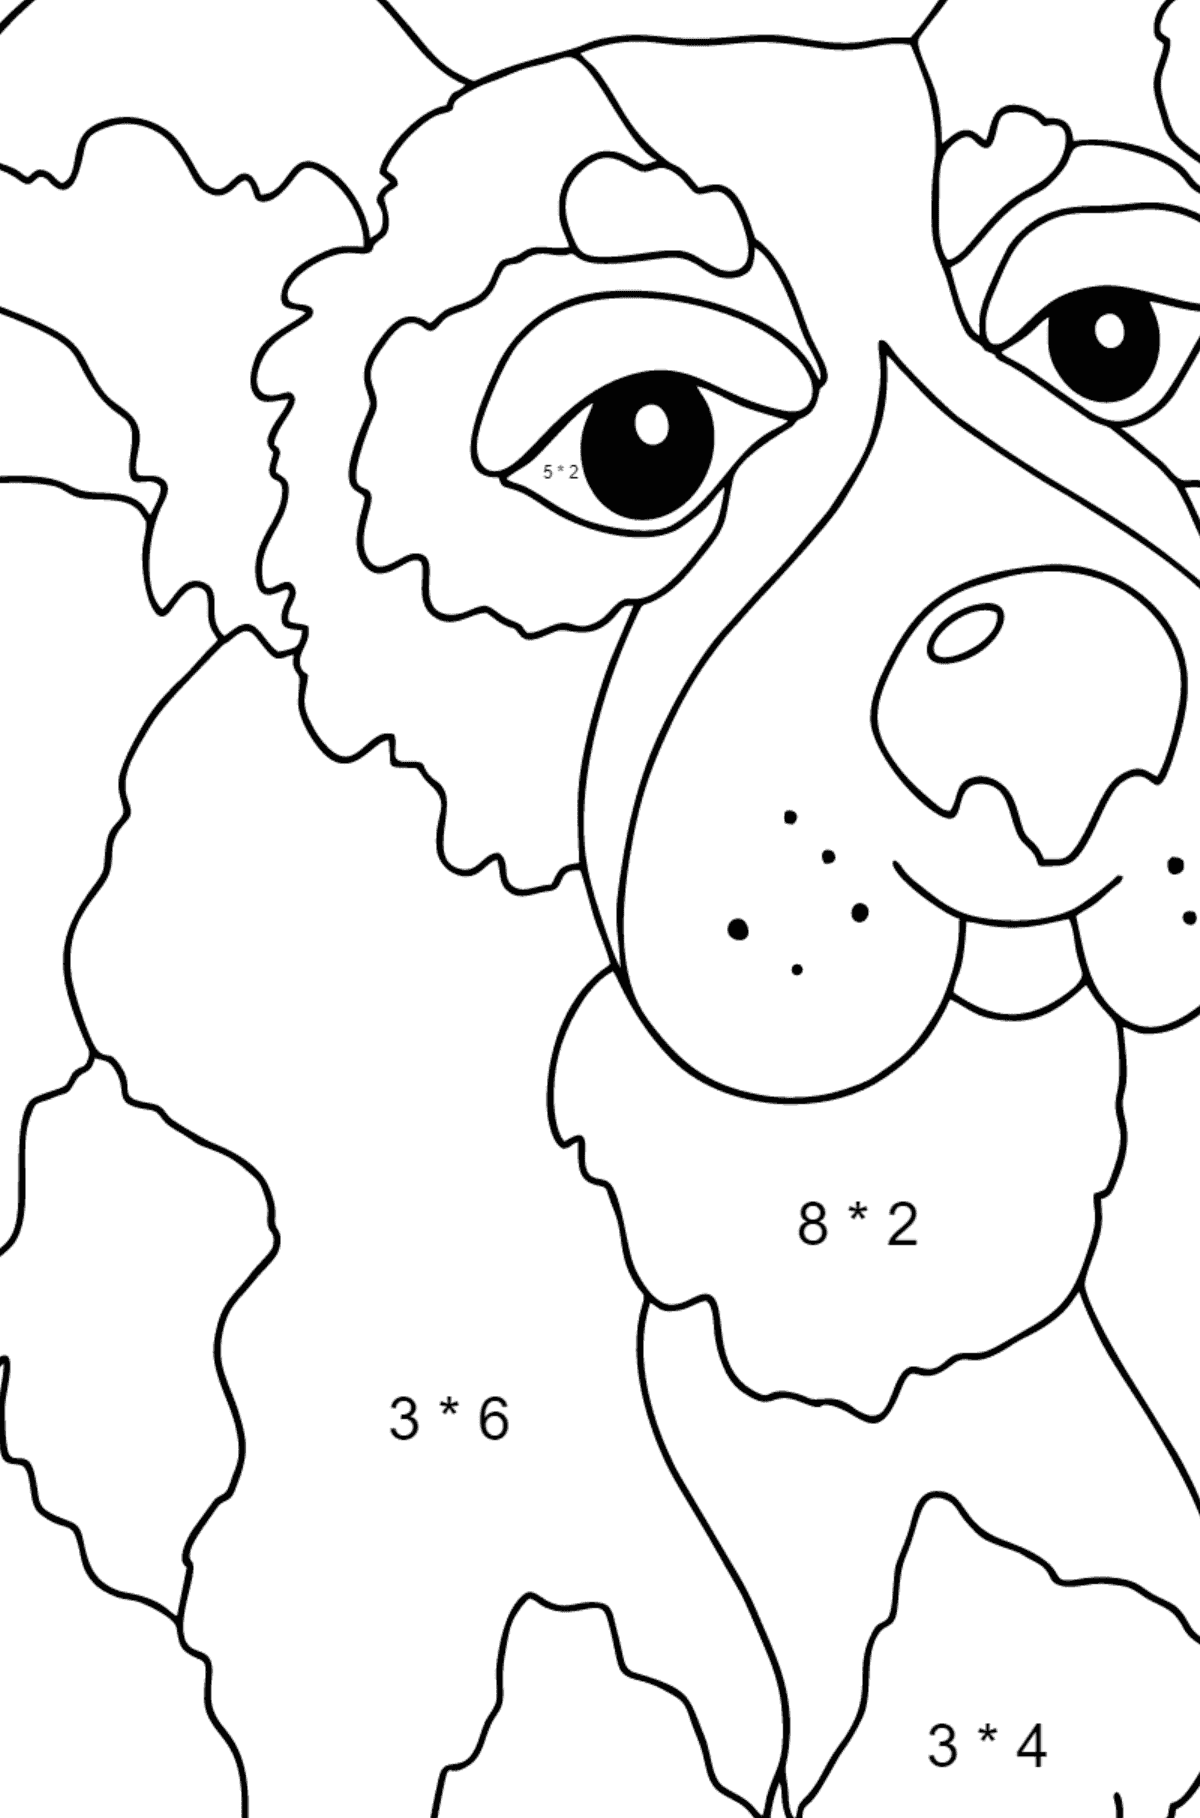 Coloring Page - A Dog is Jumping with a Blue Ball for Kids  - Color by Number Multiplication